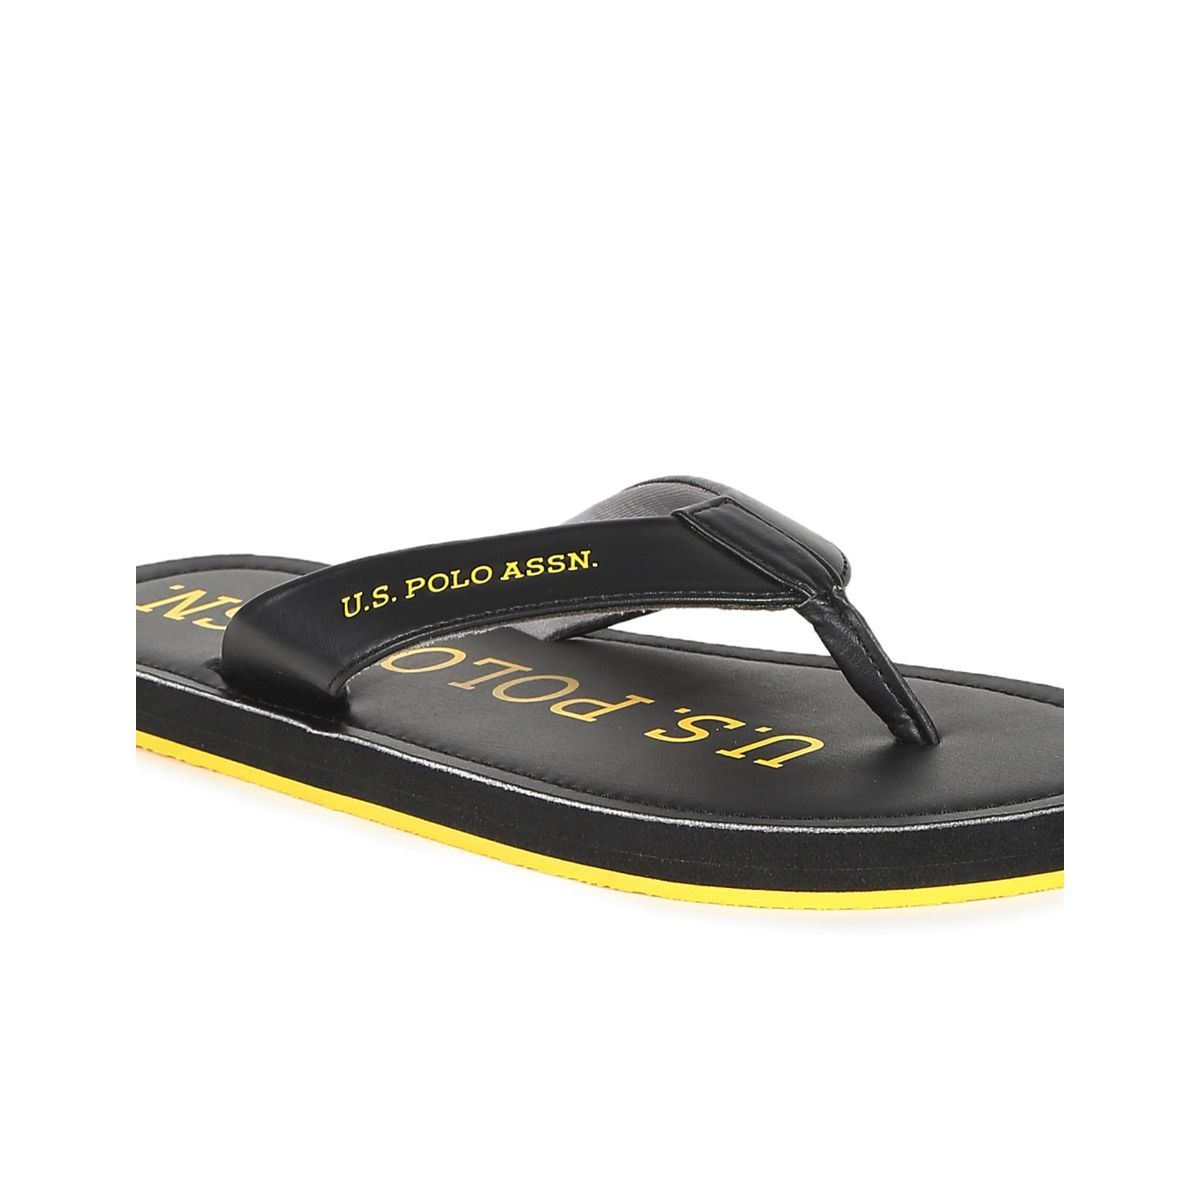 U.S. POLO ASSN. Slippers - Buy U.S. POLO ASSN. Slippers Online at Best  Price - Shop Online for Footwears in India | Flipkart.com